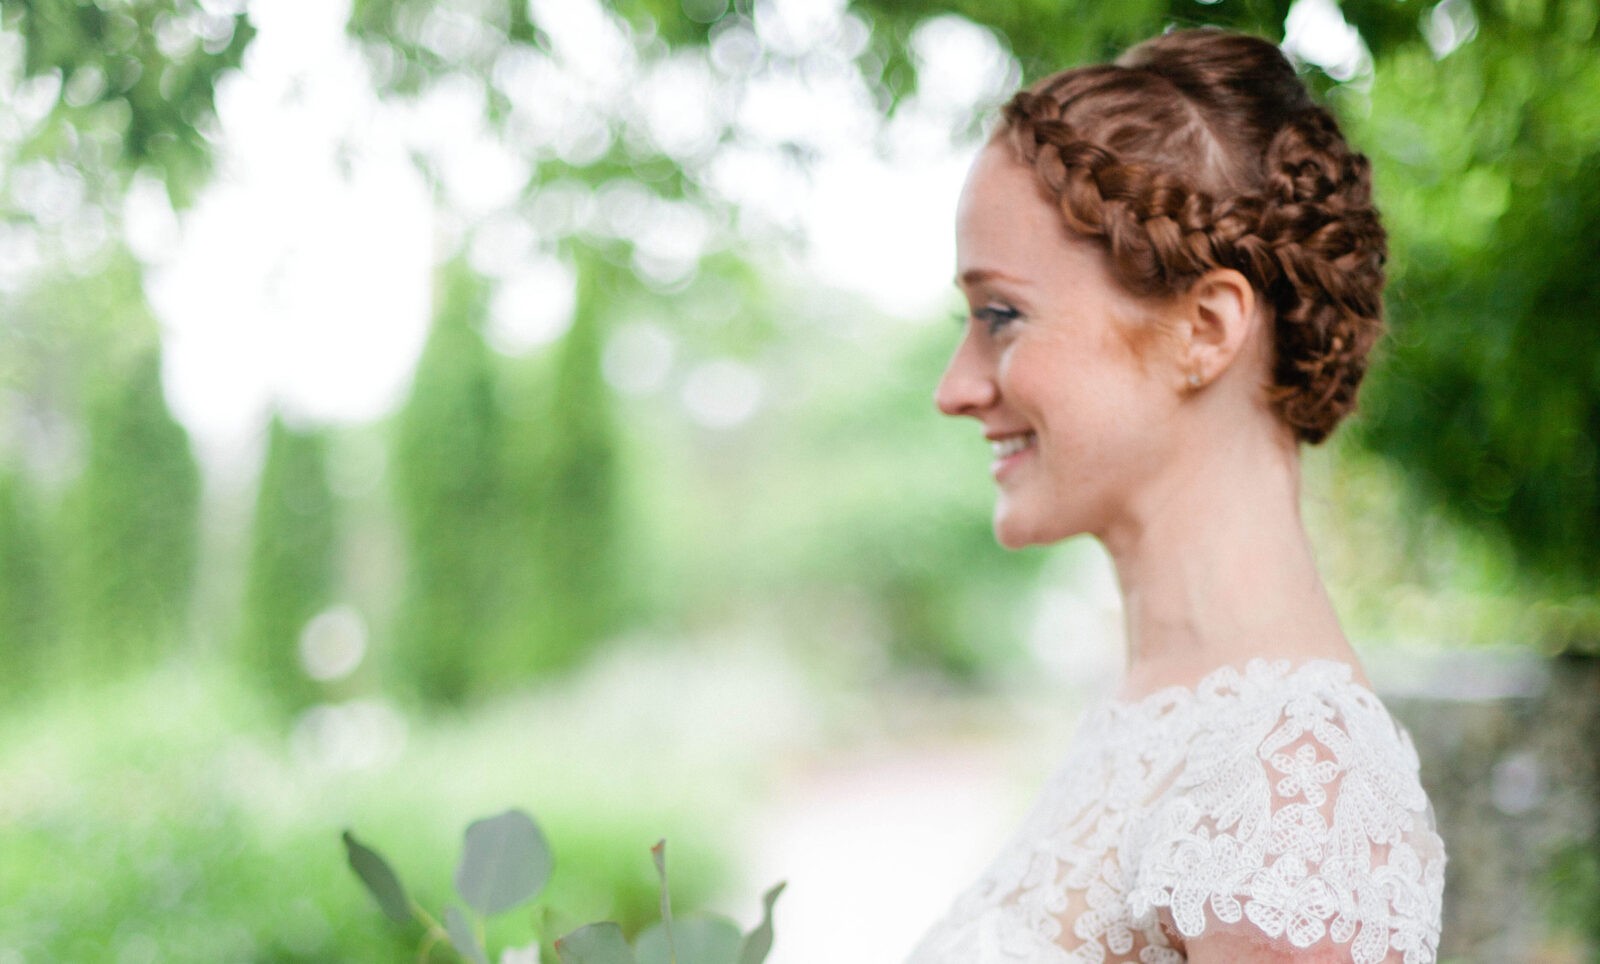 Best Wedding Hairstyles For Redheads Brides: Glamorous Inspiration For Your Big Day